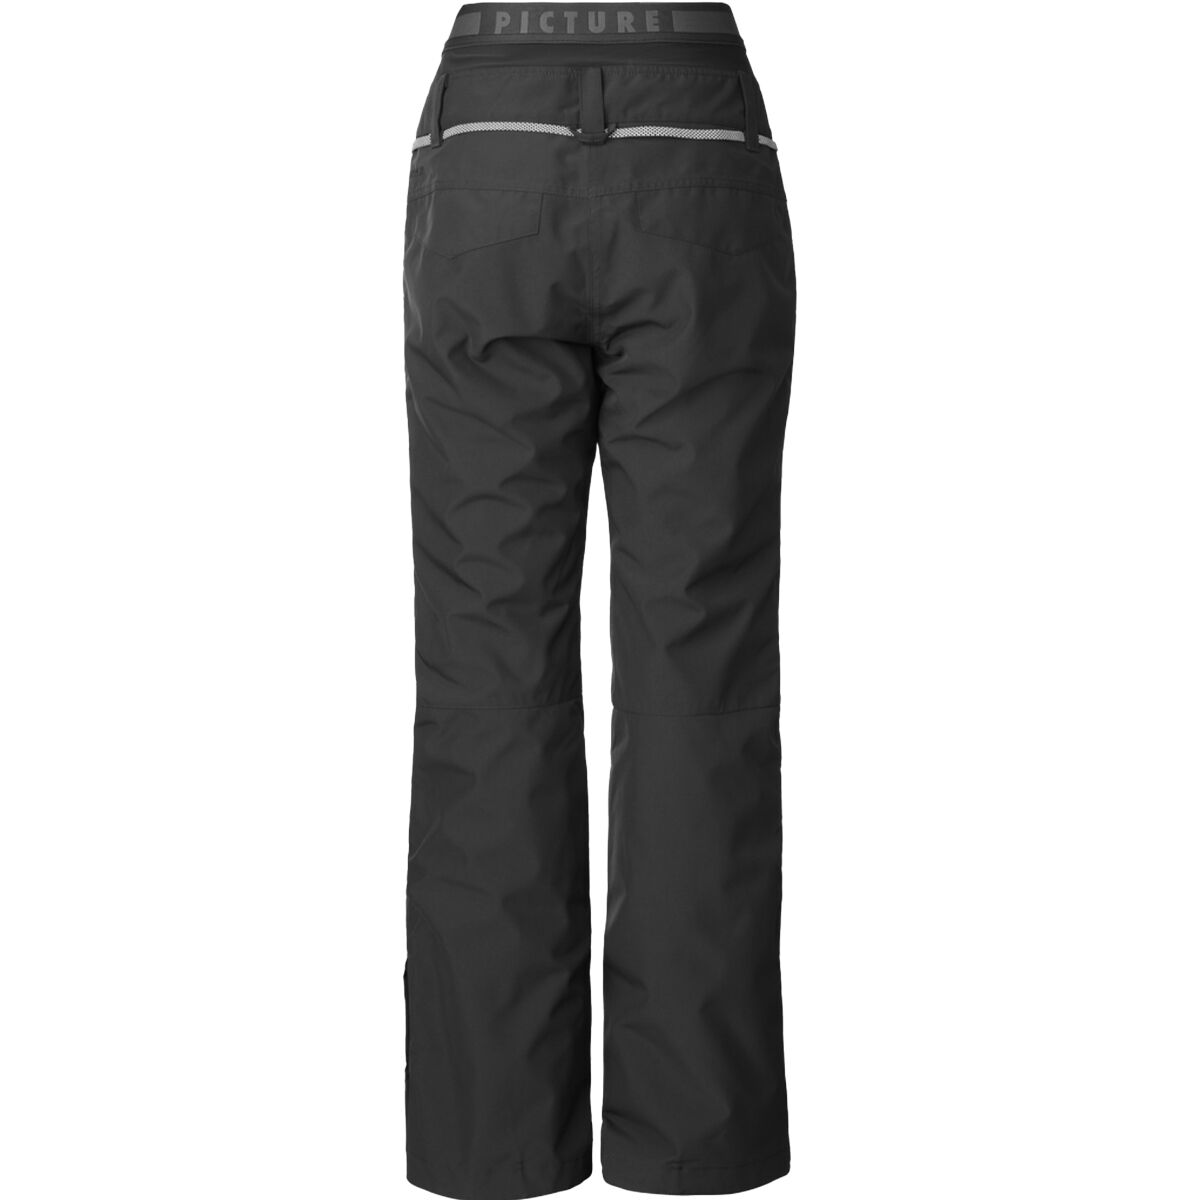 Picture Organic Treva 3 Button Pant - Women's - Clothing